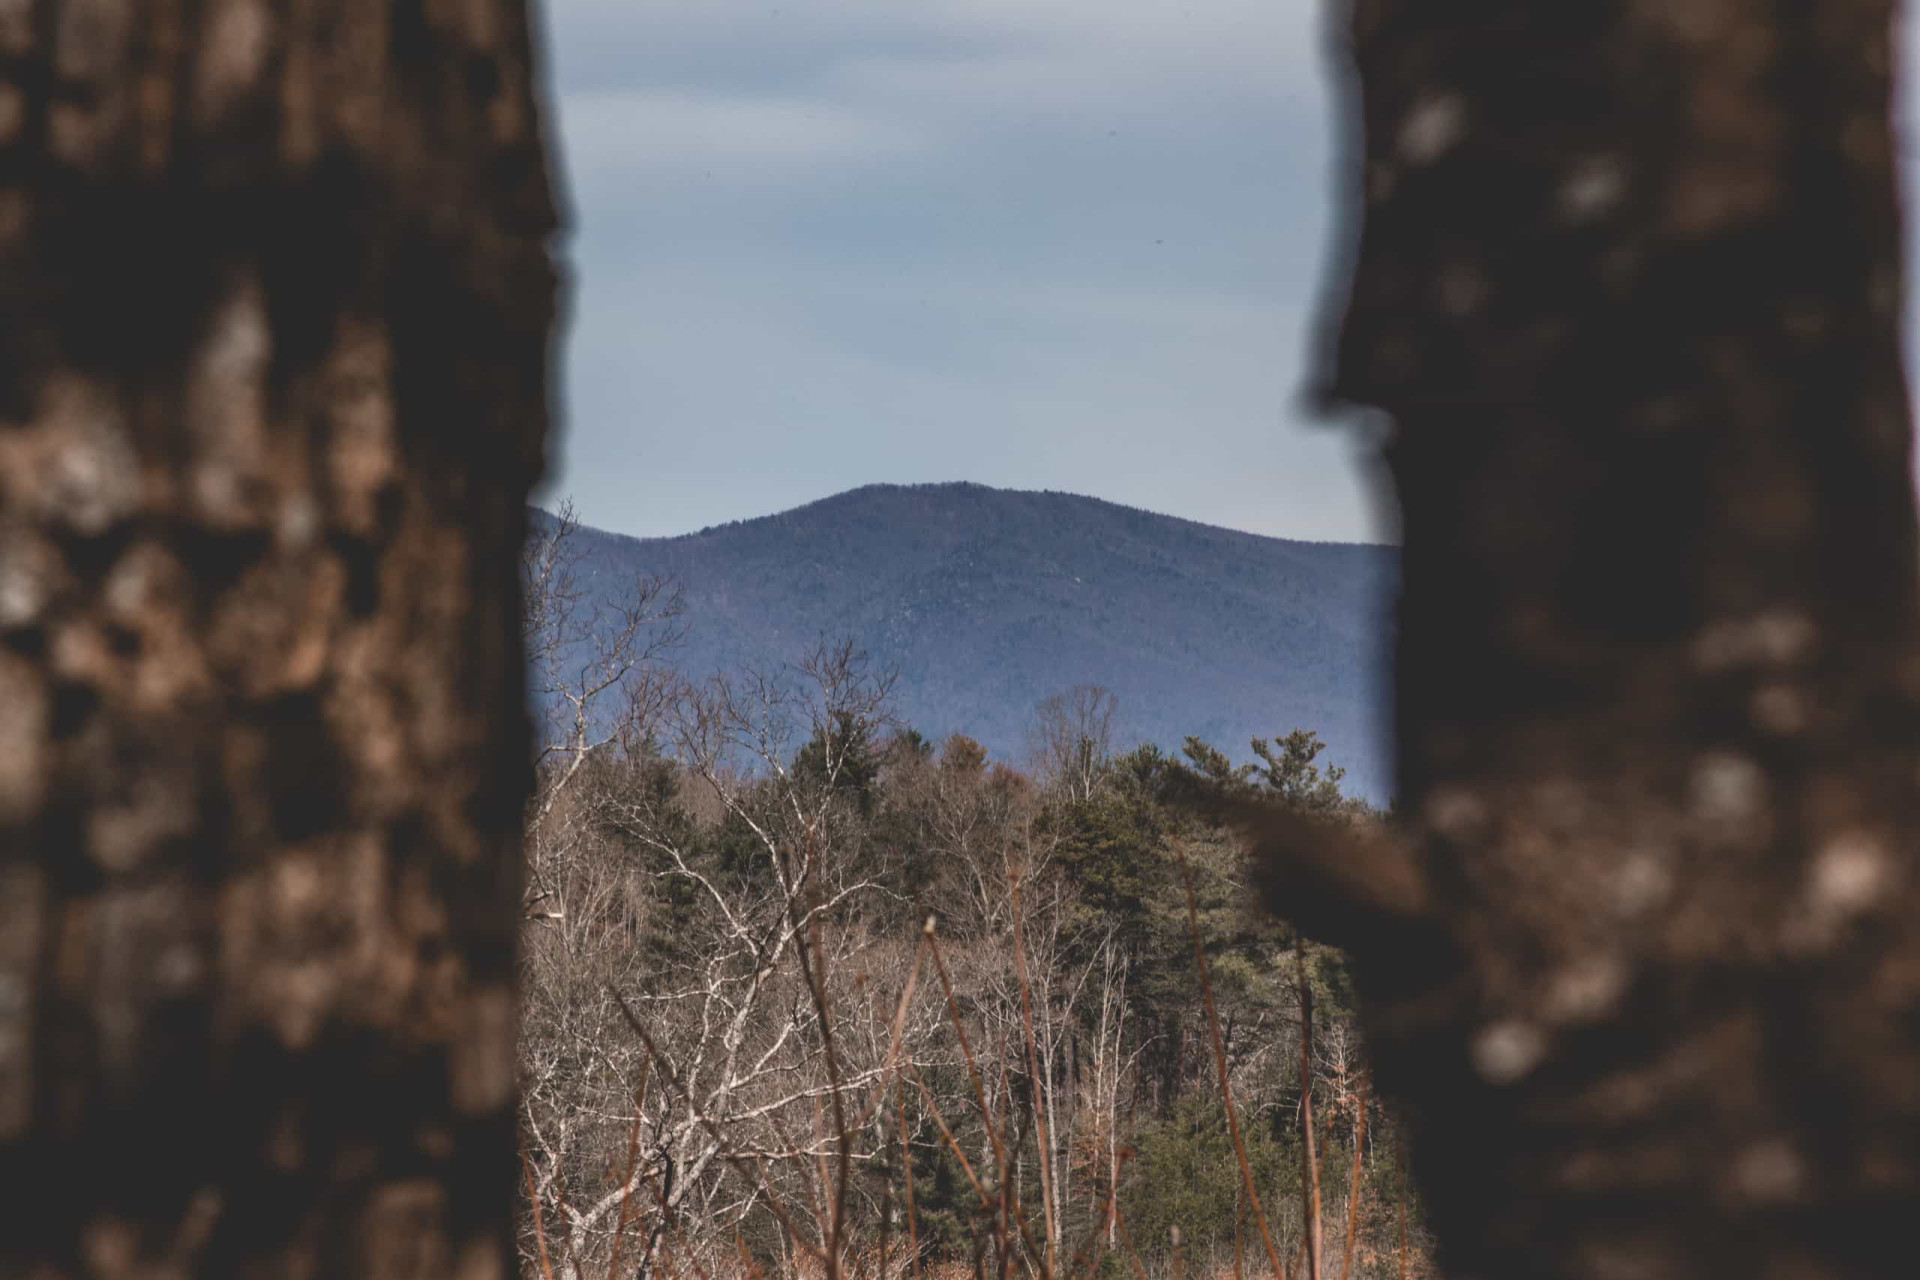 <p>The Brown Mountain lights remain the most famous paranormal phenomenon in the state. Mysterious lights have been reported on or near Brown Mountain in the Pisgah National Forest. Some say they are the spirits of Native American women searching for the souls of men who had perished in battle. </p>